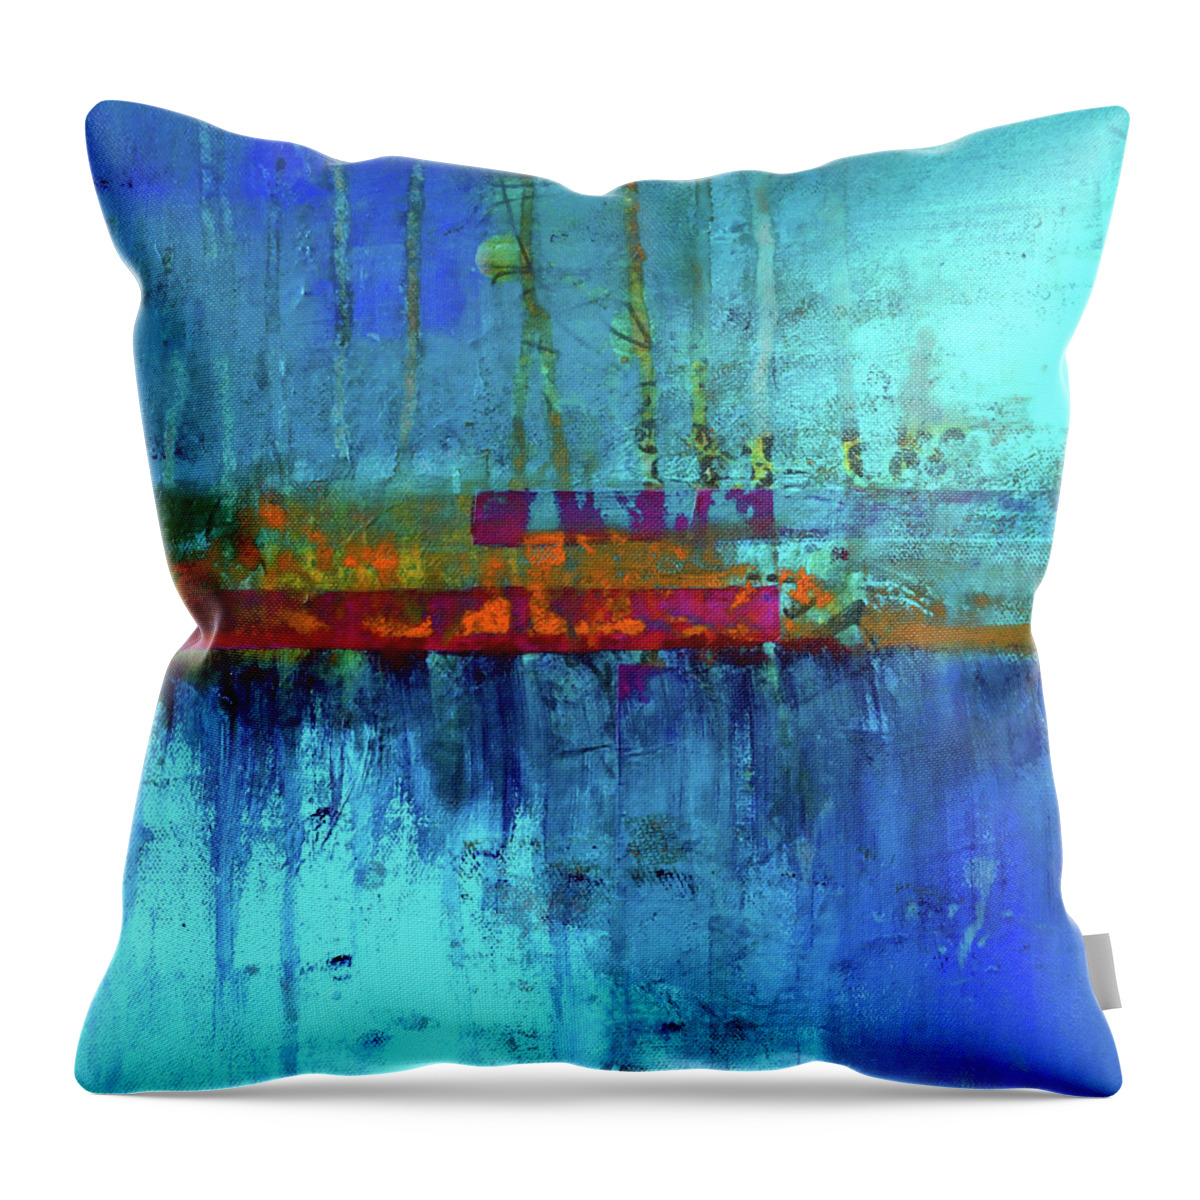 Large Blue Abstract Painting Throw Pillow featuring the painting Color Pond by Nancy Merkle